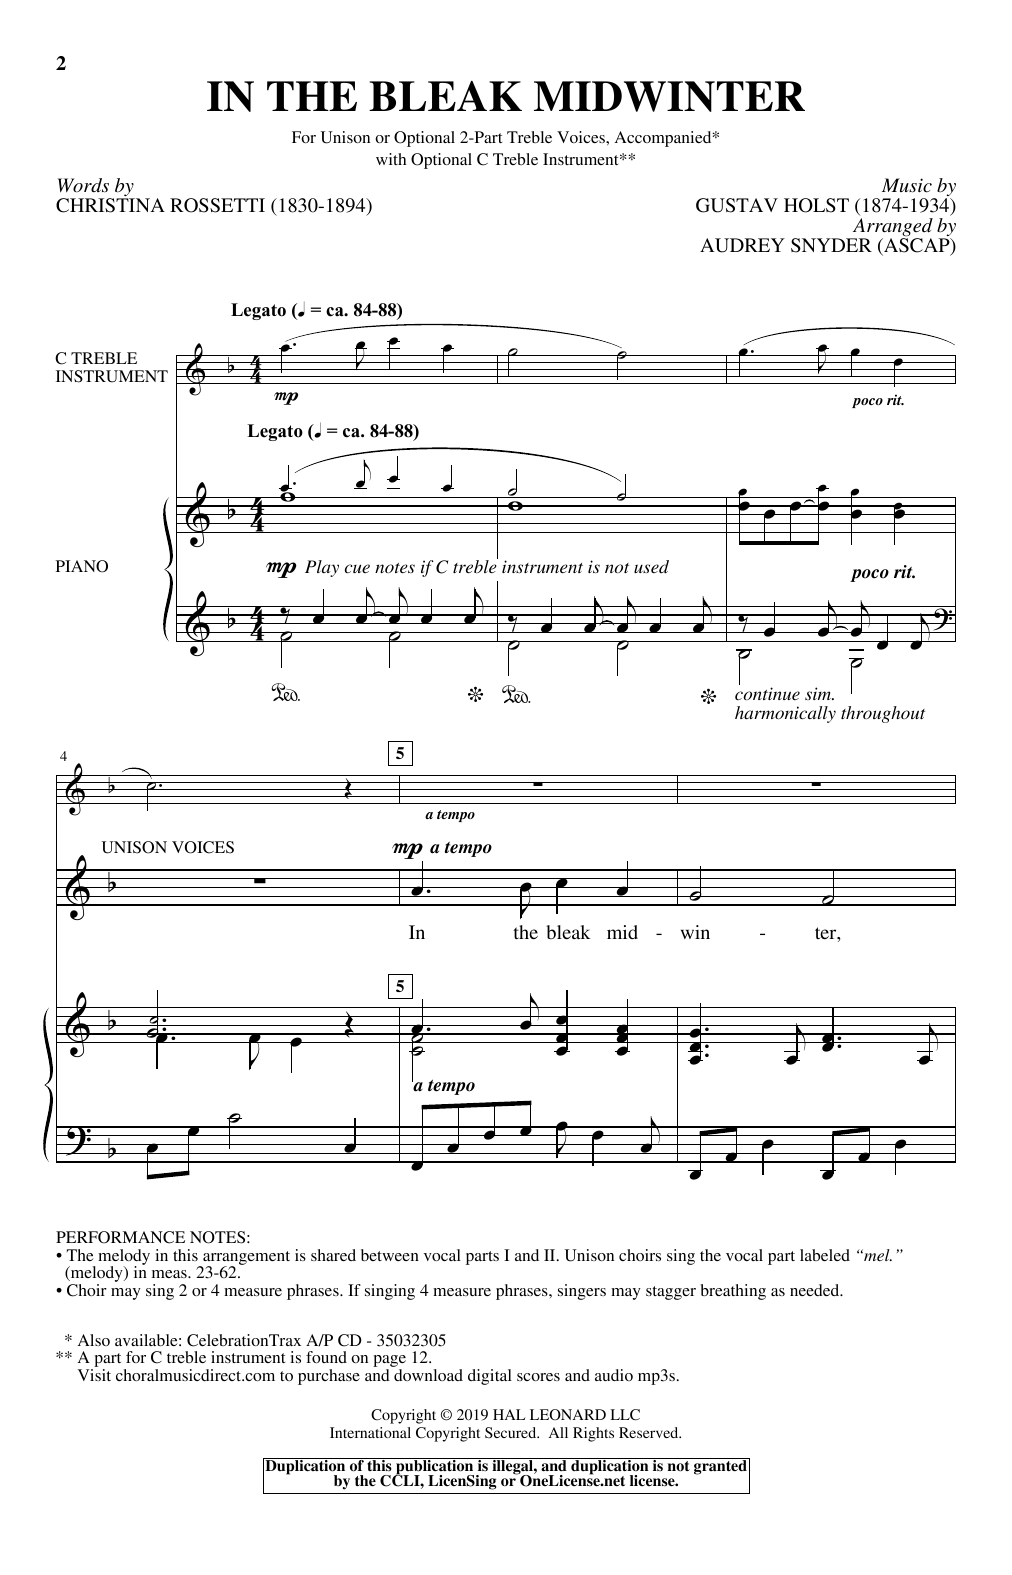 Download Audrey Snyder In The Bleak Midwinter Sheet Music